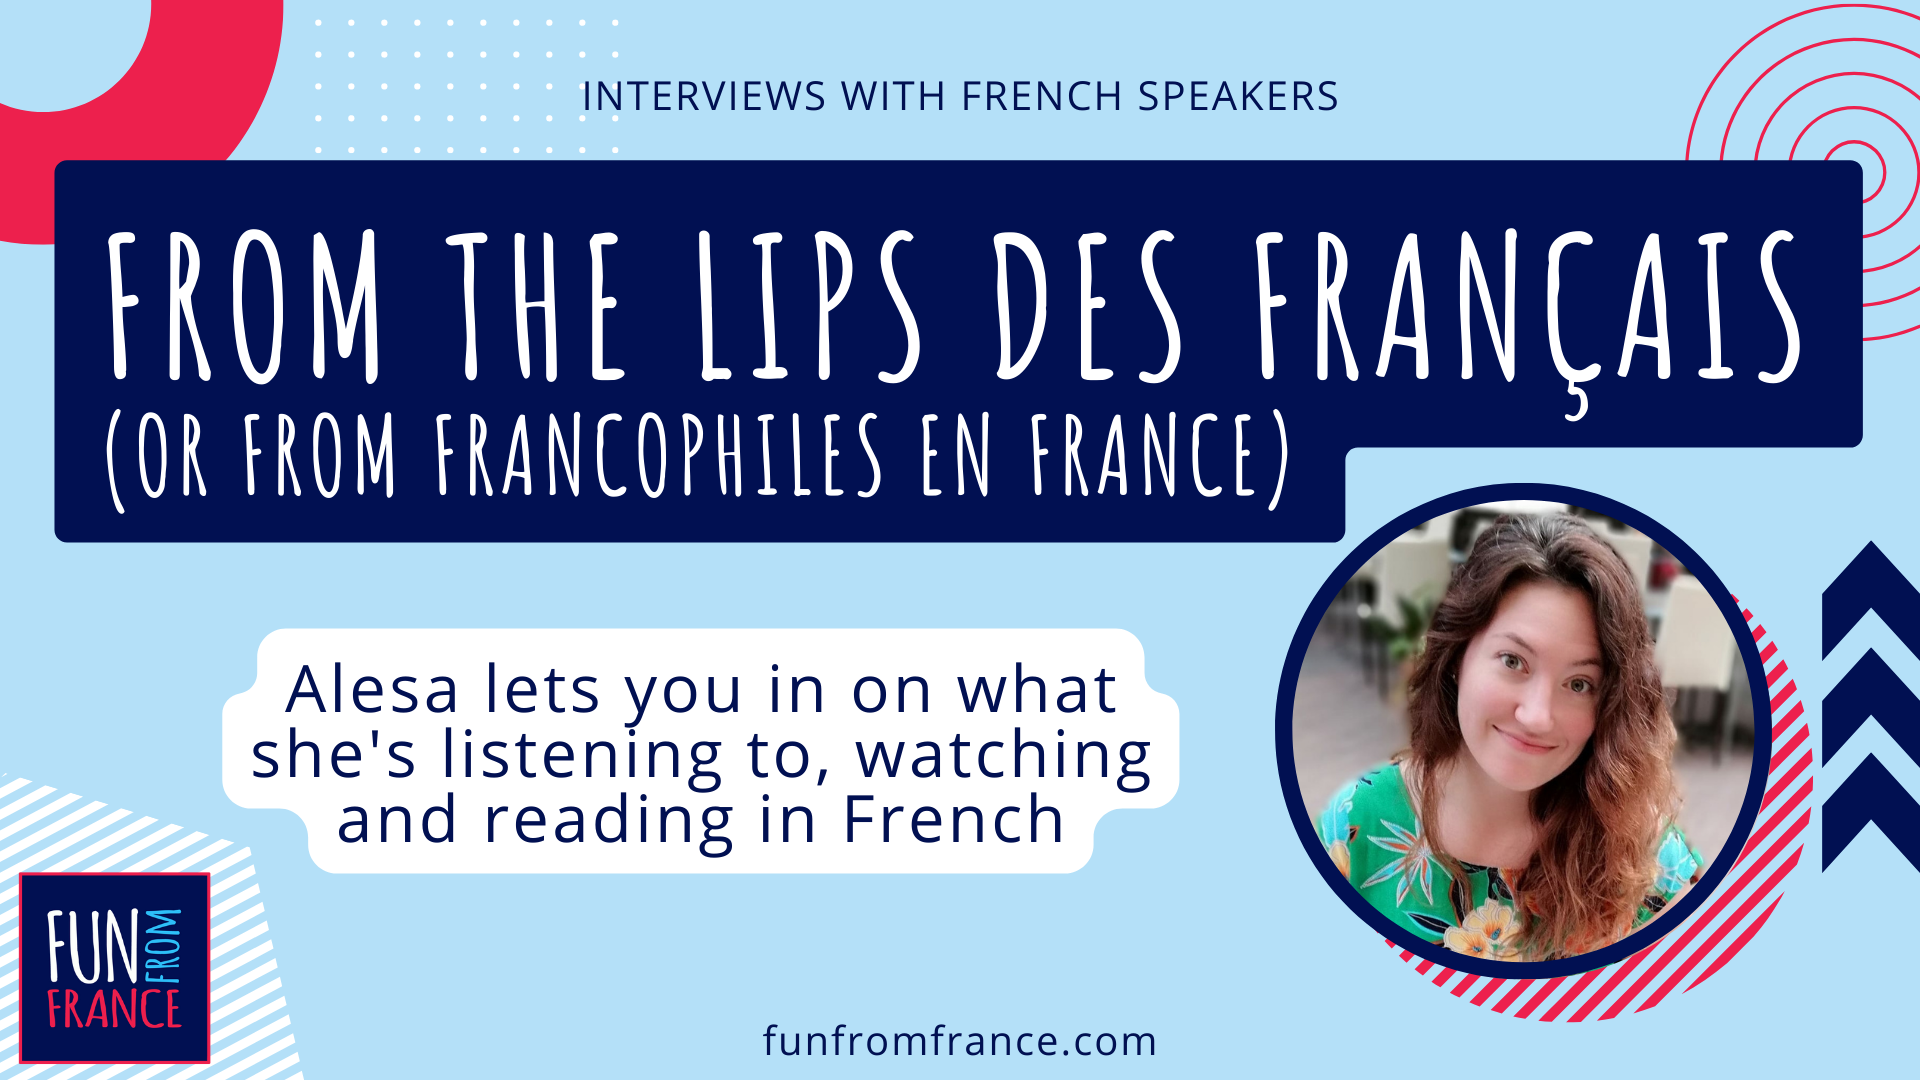 Francophile Alesa shares her favorite French songs, movies, books & more